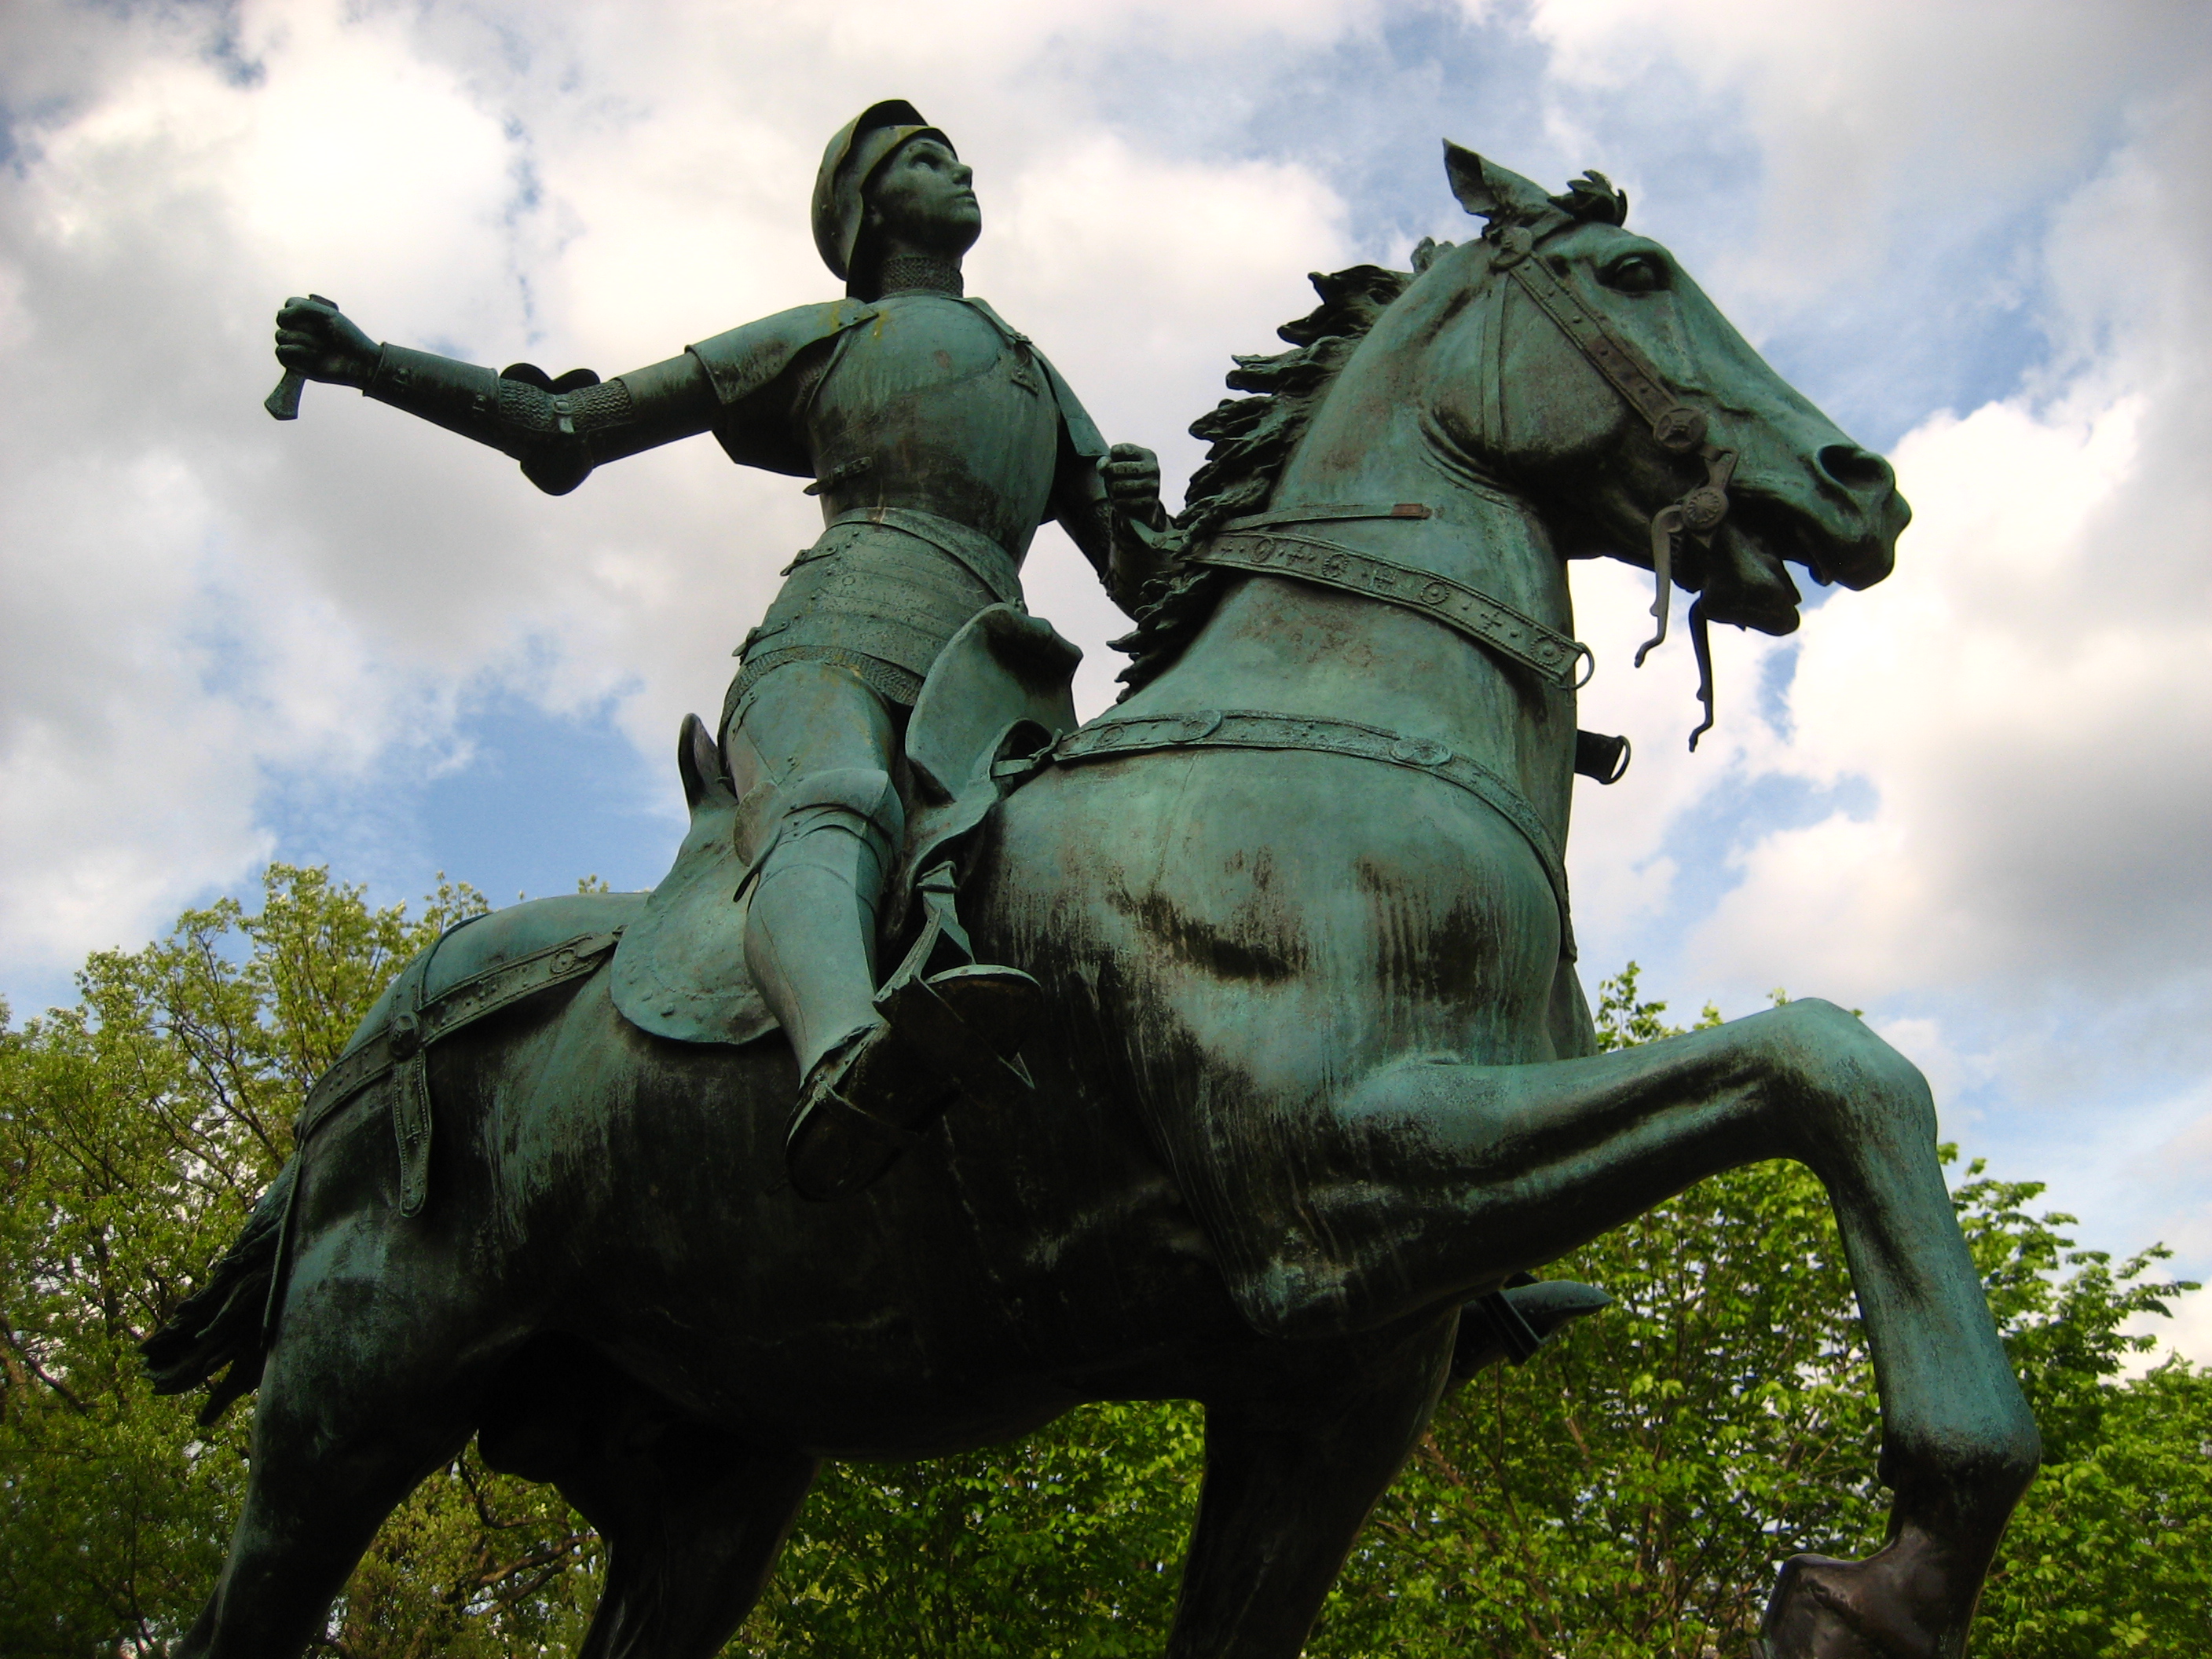 http://upload.wikimedia.org/wikipedia/commons/a/a8/Joan_of_Arc_at_Meridian_Hill_Park.jpg